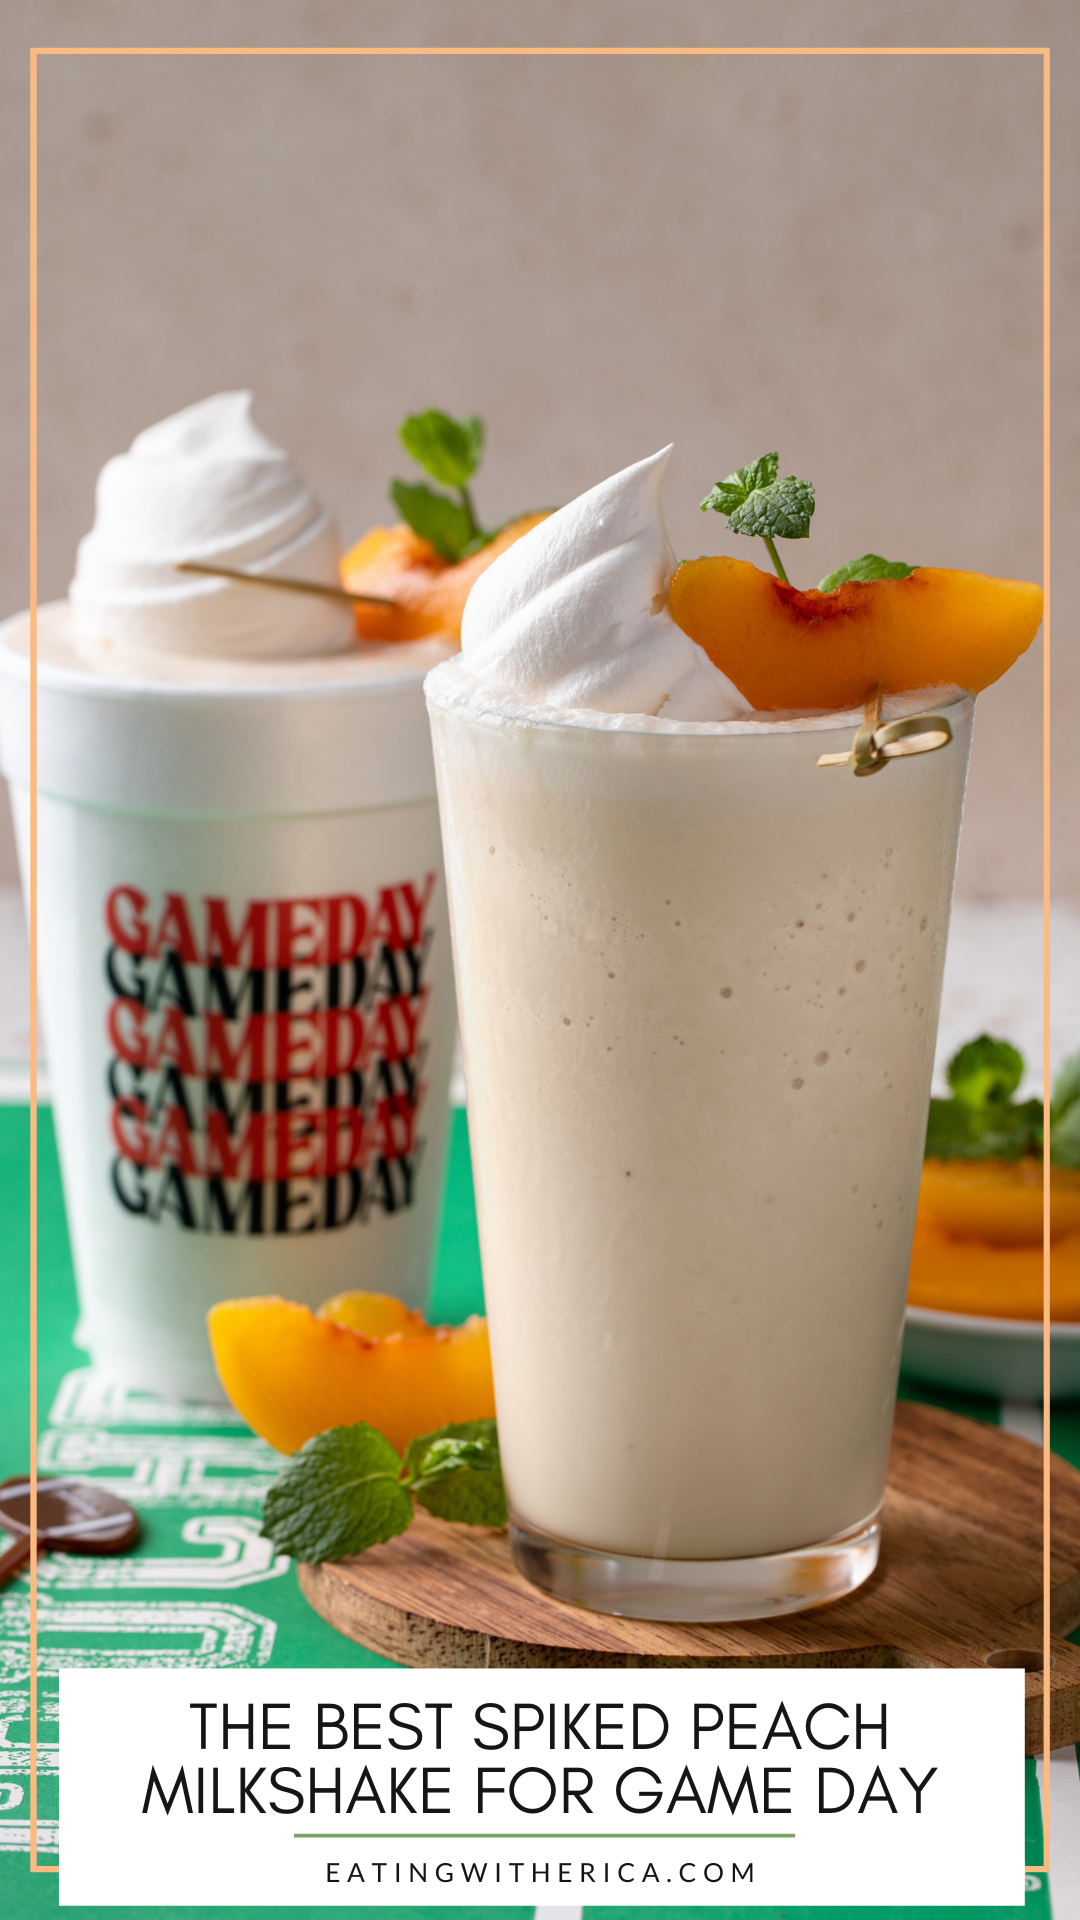 Looking for the perfect game day companion? Click here to try the most amazing Spiked Peach Milkshake EVER!